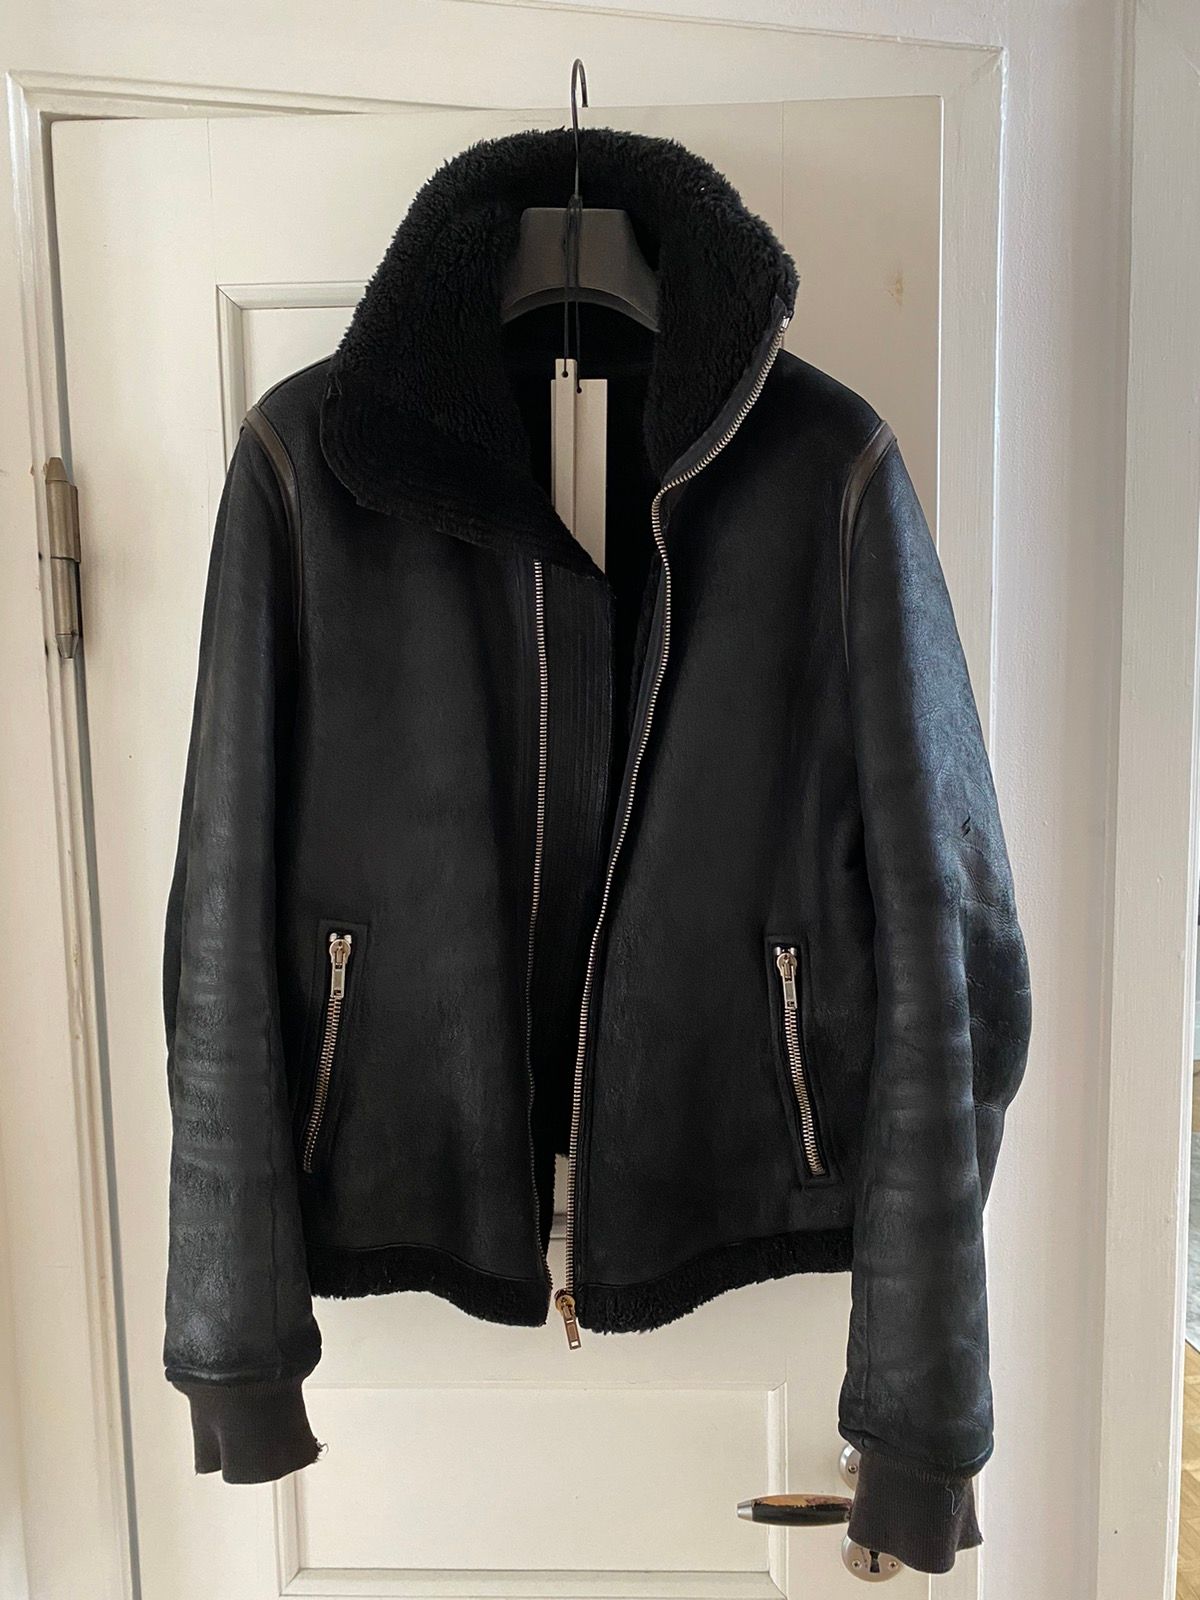 Rick Owens fw08 ”STAG” shearling jacket | Grailed